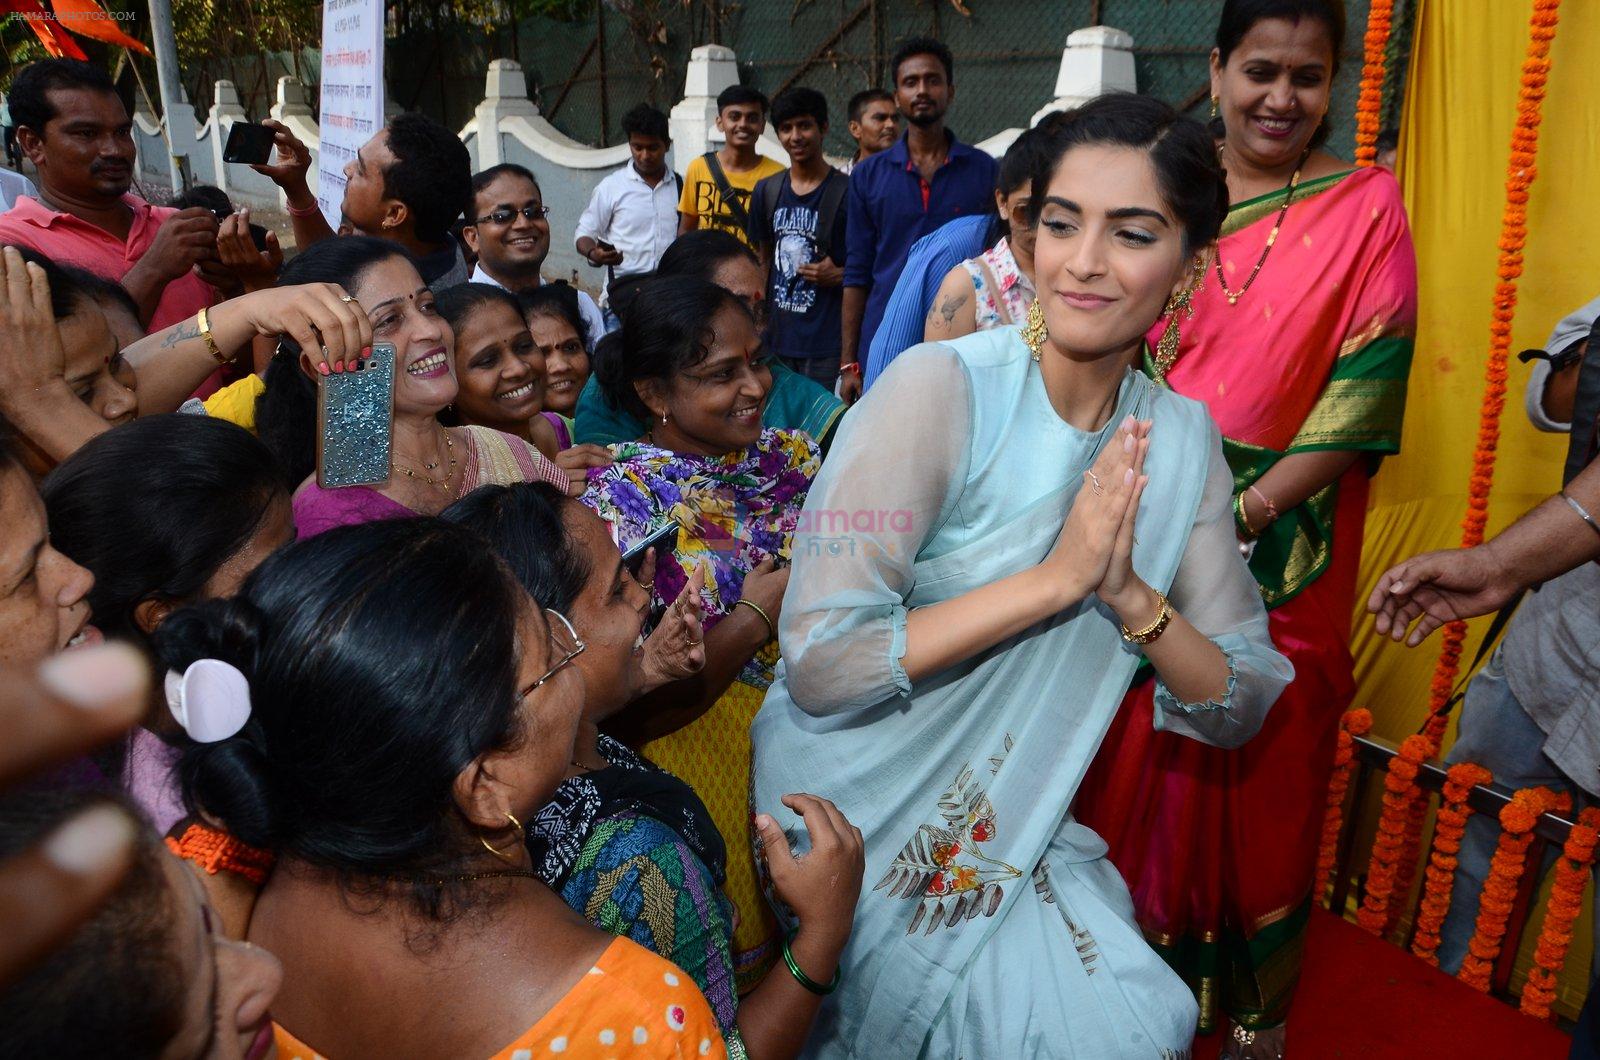 Sonam Kapoor at Neerja Bhanot tribute event at a school on 15th June 2016